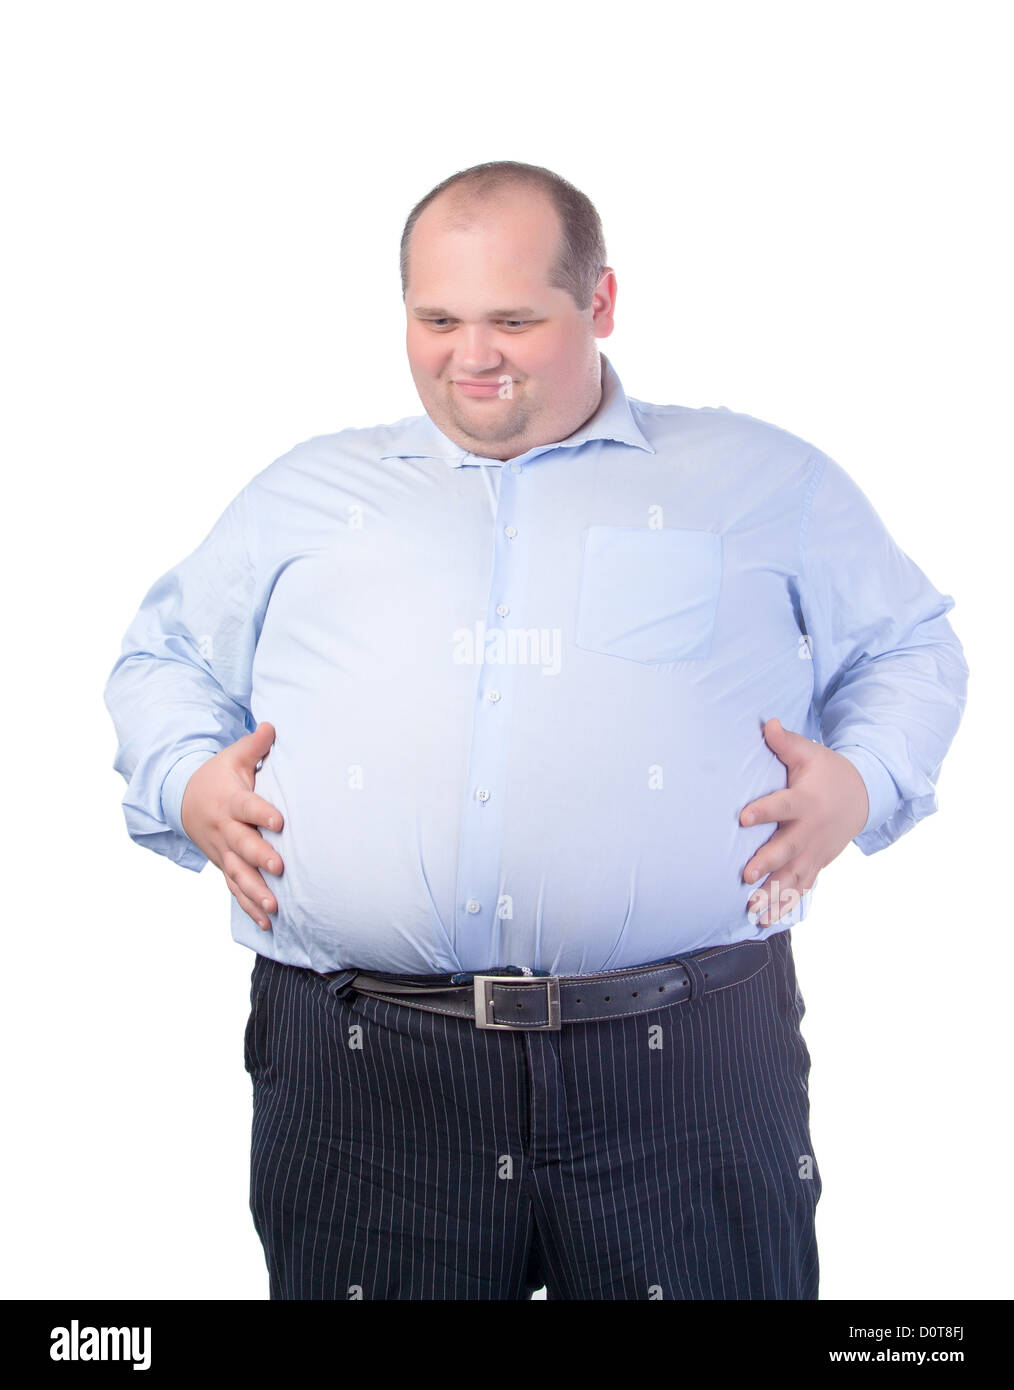 Happy Fat Man in a Blue Shirt Stock Photo - Alamy